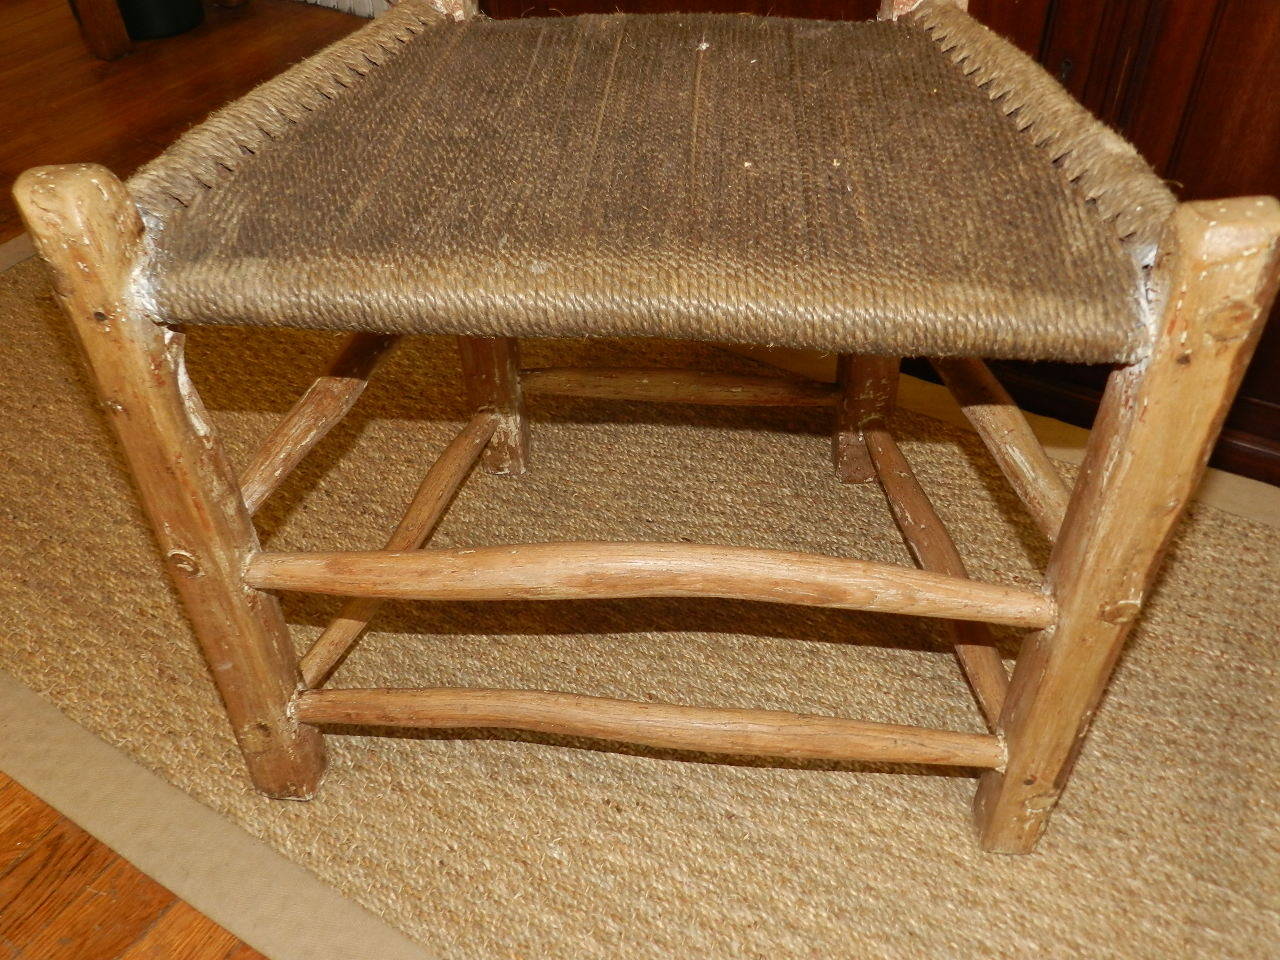 Hand-Crafted Scottish Orkney Island Chairs For Sale